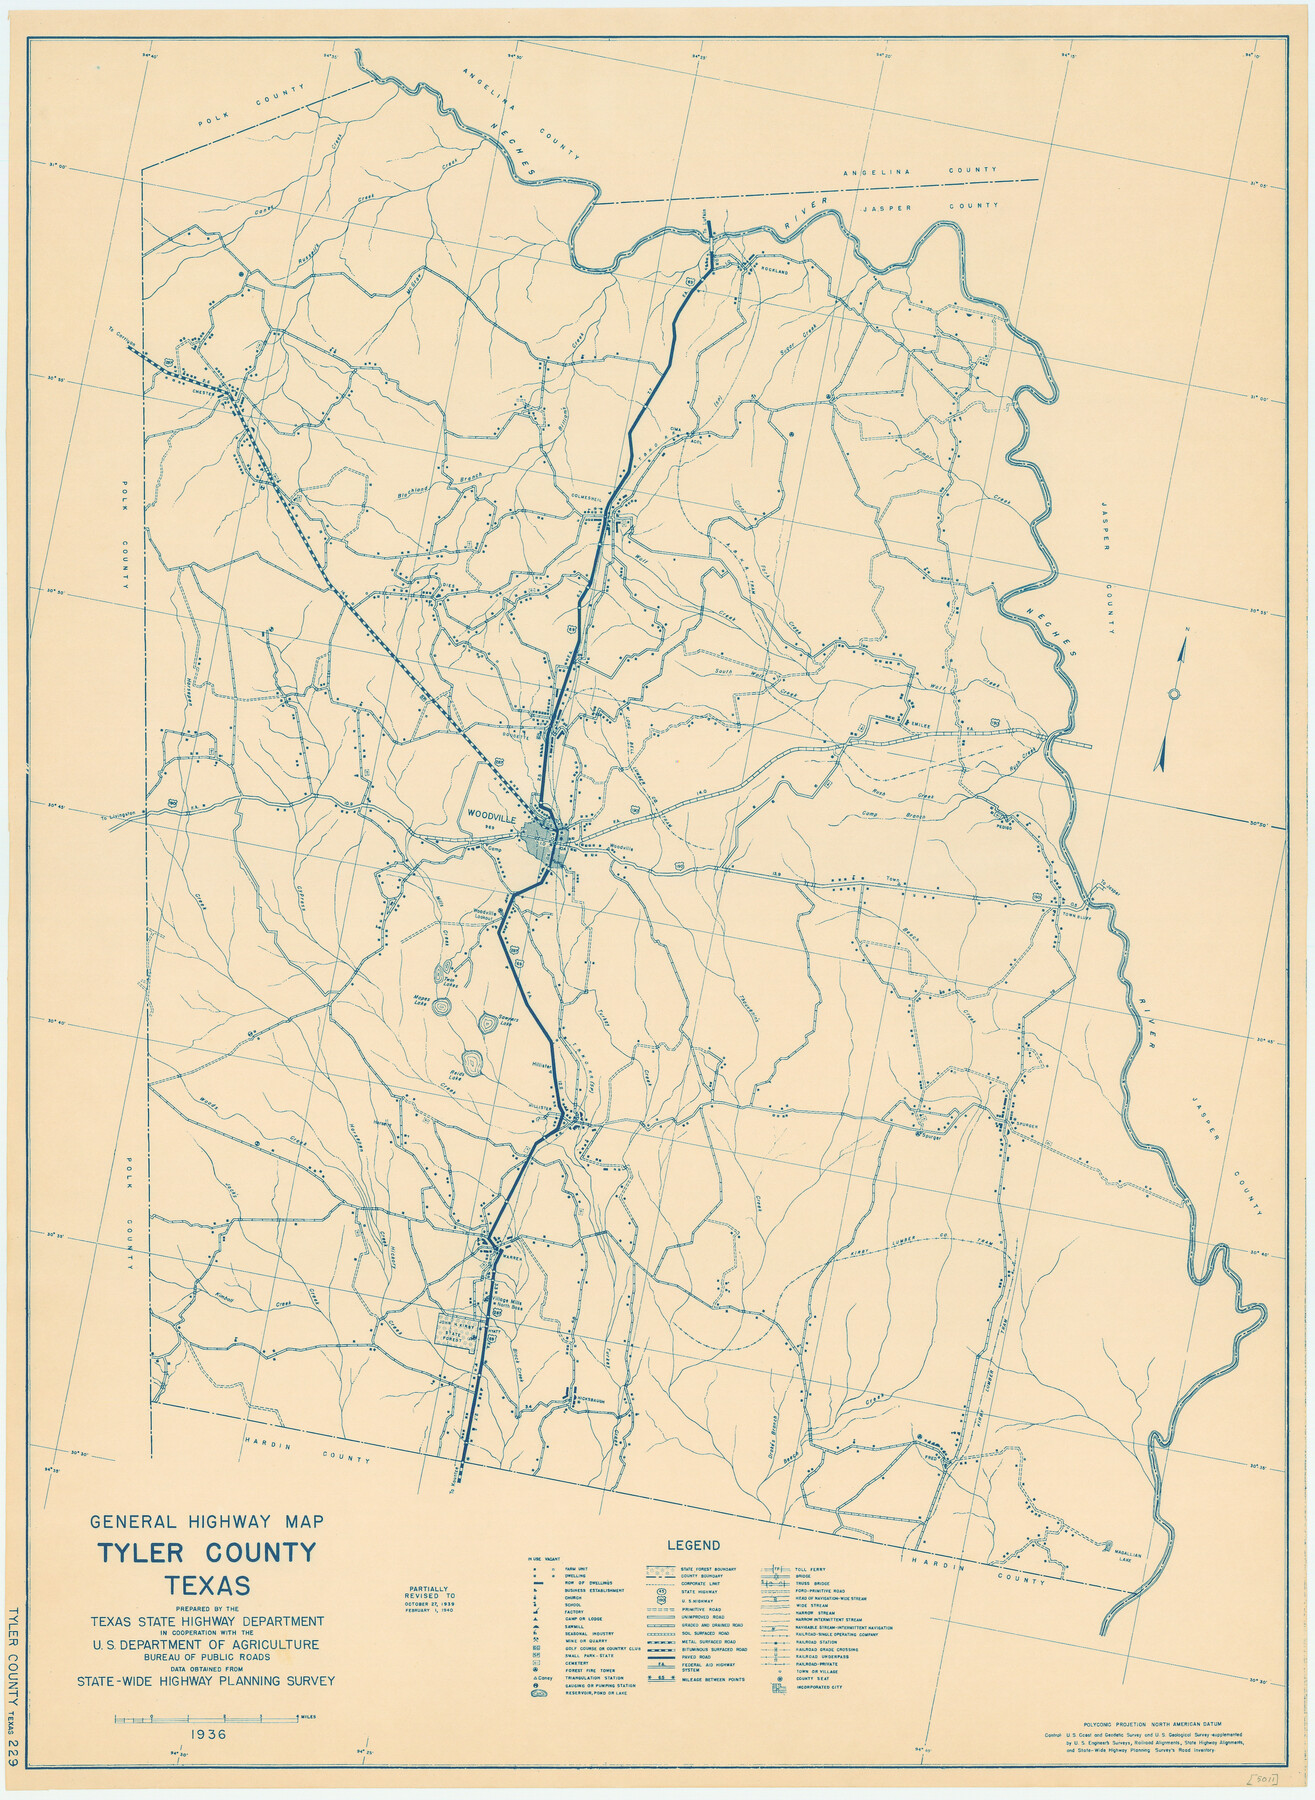 79264, General Highway Map, Tyler County, Texas, Texas State Library and Archives